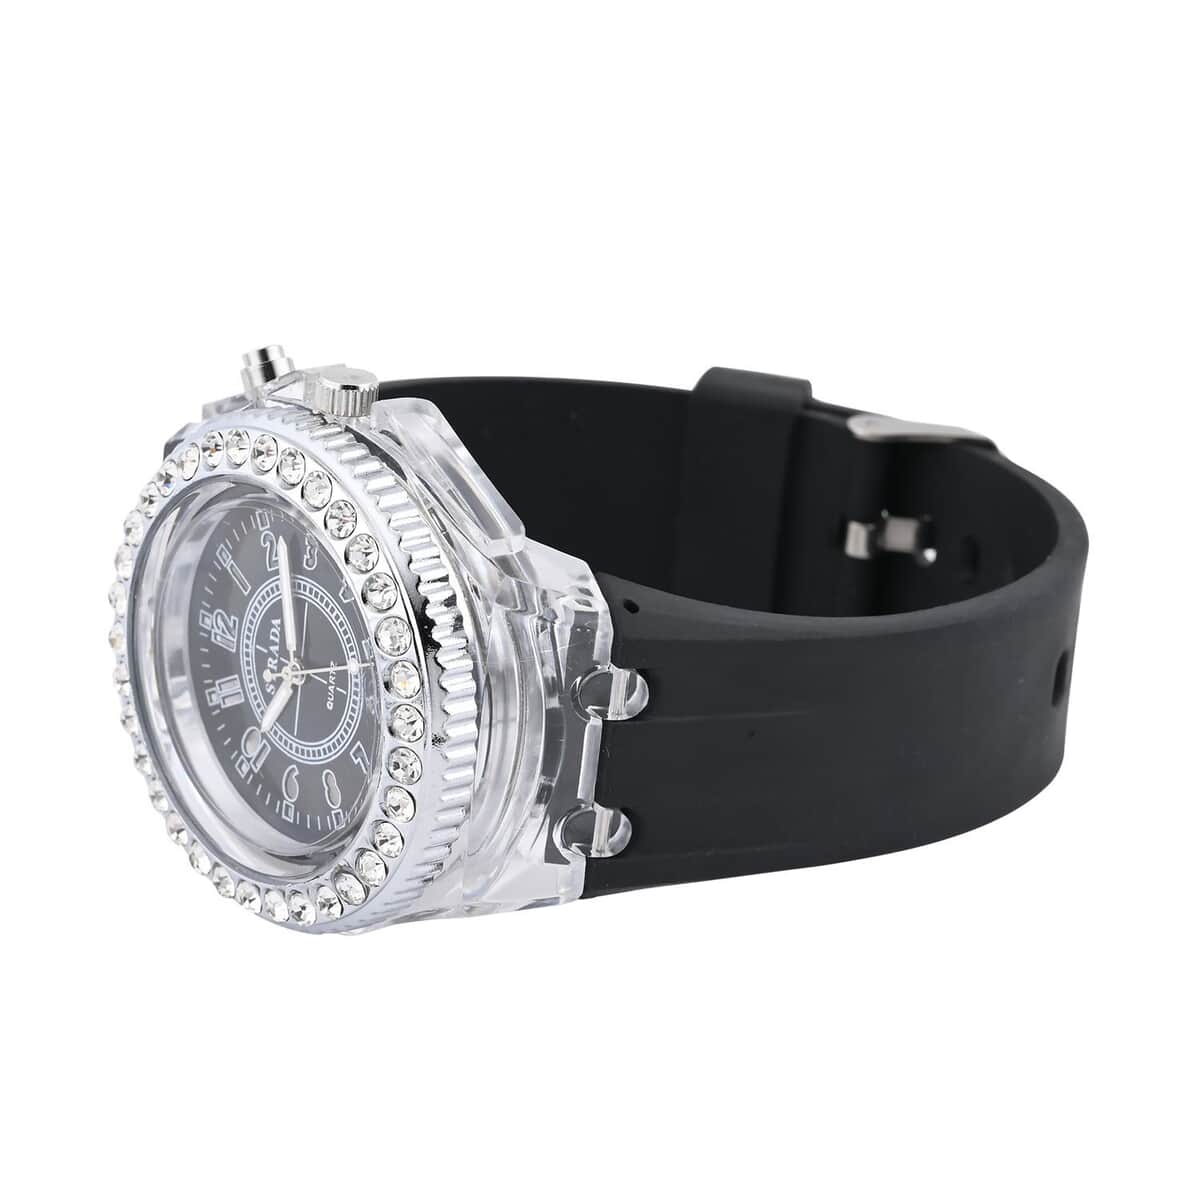 Strada Austrian Crystal Japanese Movement Watch with Black Silicone Strap (25.40 mm) (6.0-7.75 Inches) image number 4